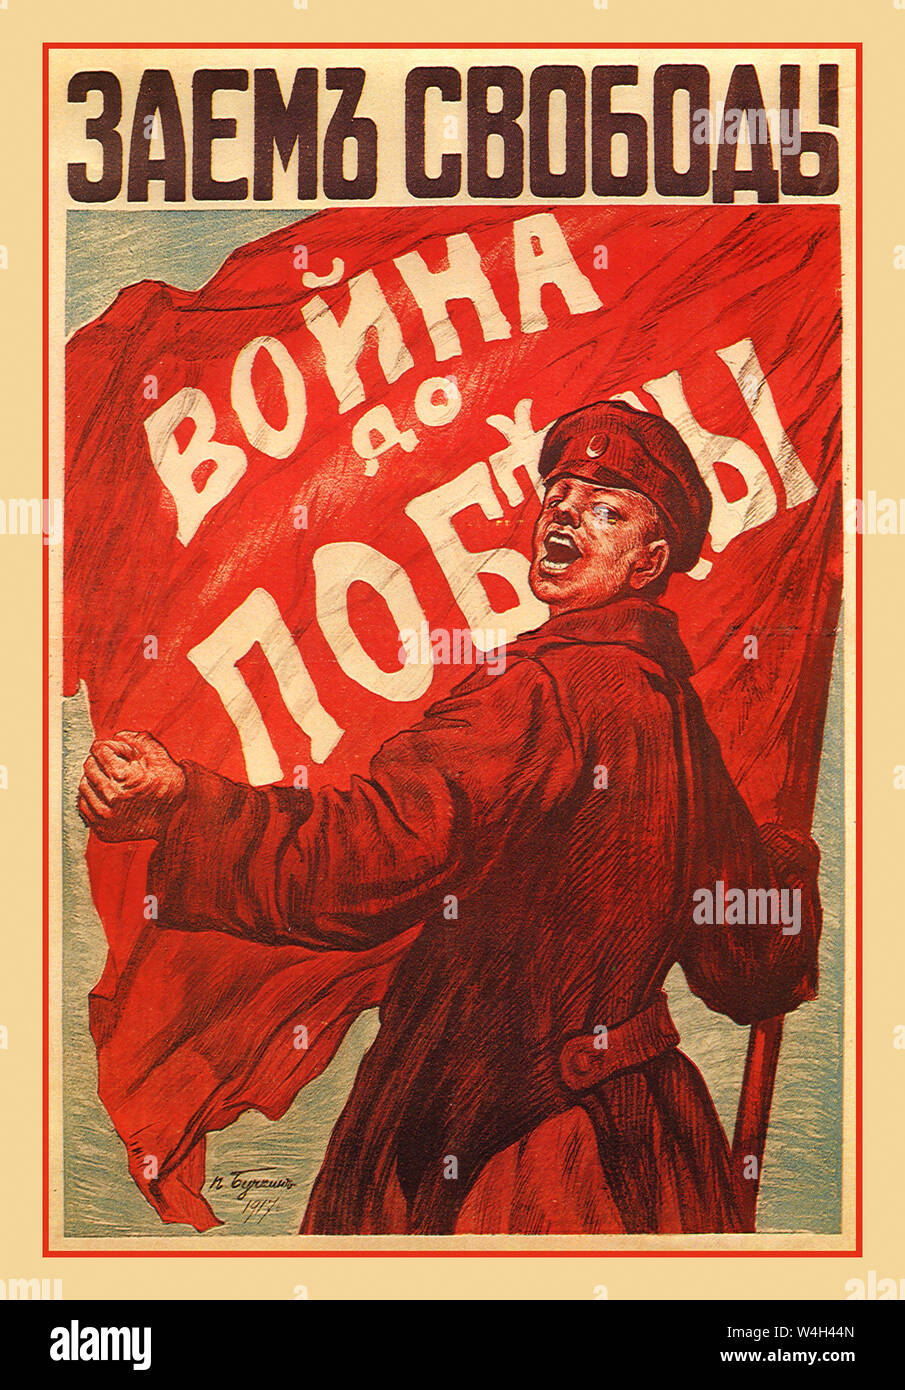 Vintage Russian Revolution Poster 1917 The Russian Revolution of 1917 was one of the most explosive political events of the 20th century. The violent revolution marked the end of the Romanov dynasty Russian propaganda poster showing a cheering Soviet soldier clenching fist and holding a red banner painted with  'War until Victory' 1917. Propaganda Russian Soviet Propaganda Poster Russia poster Stock Photo